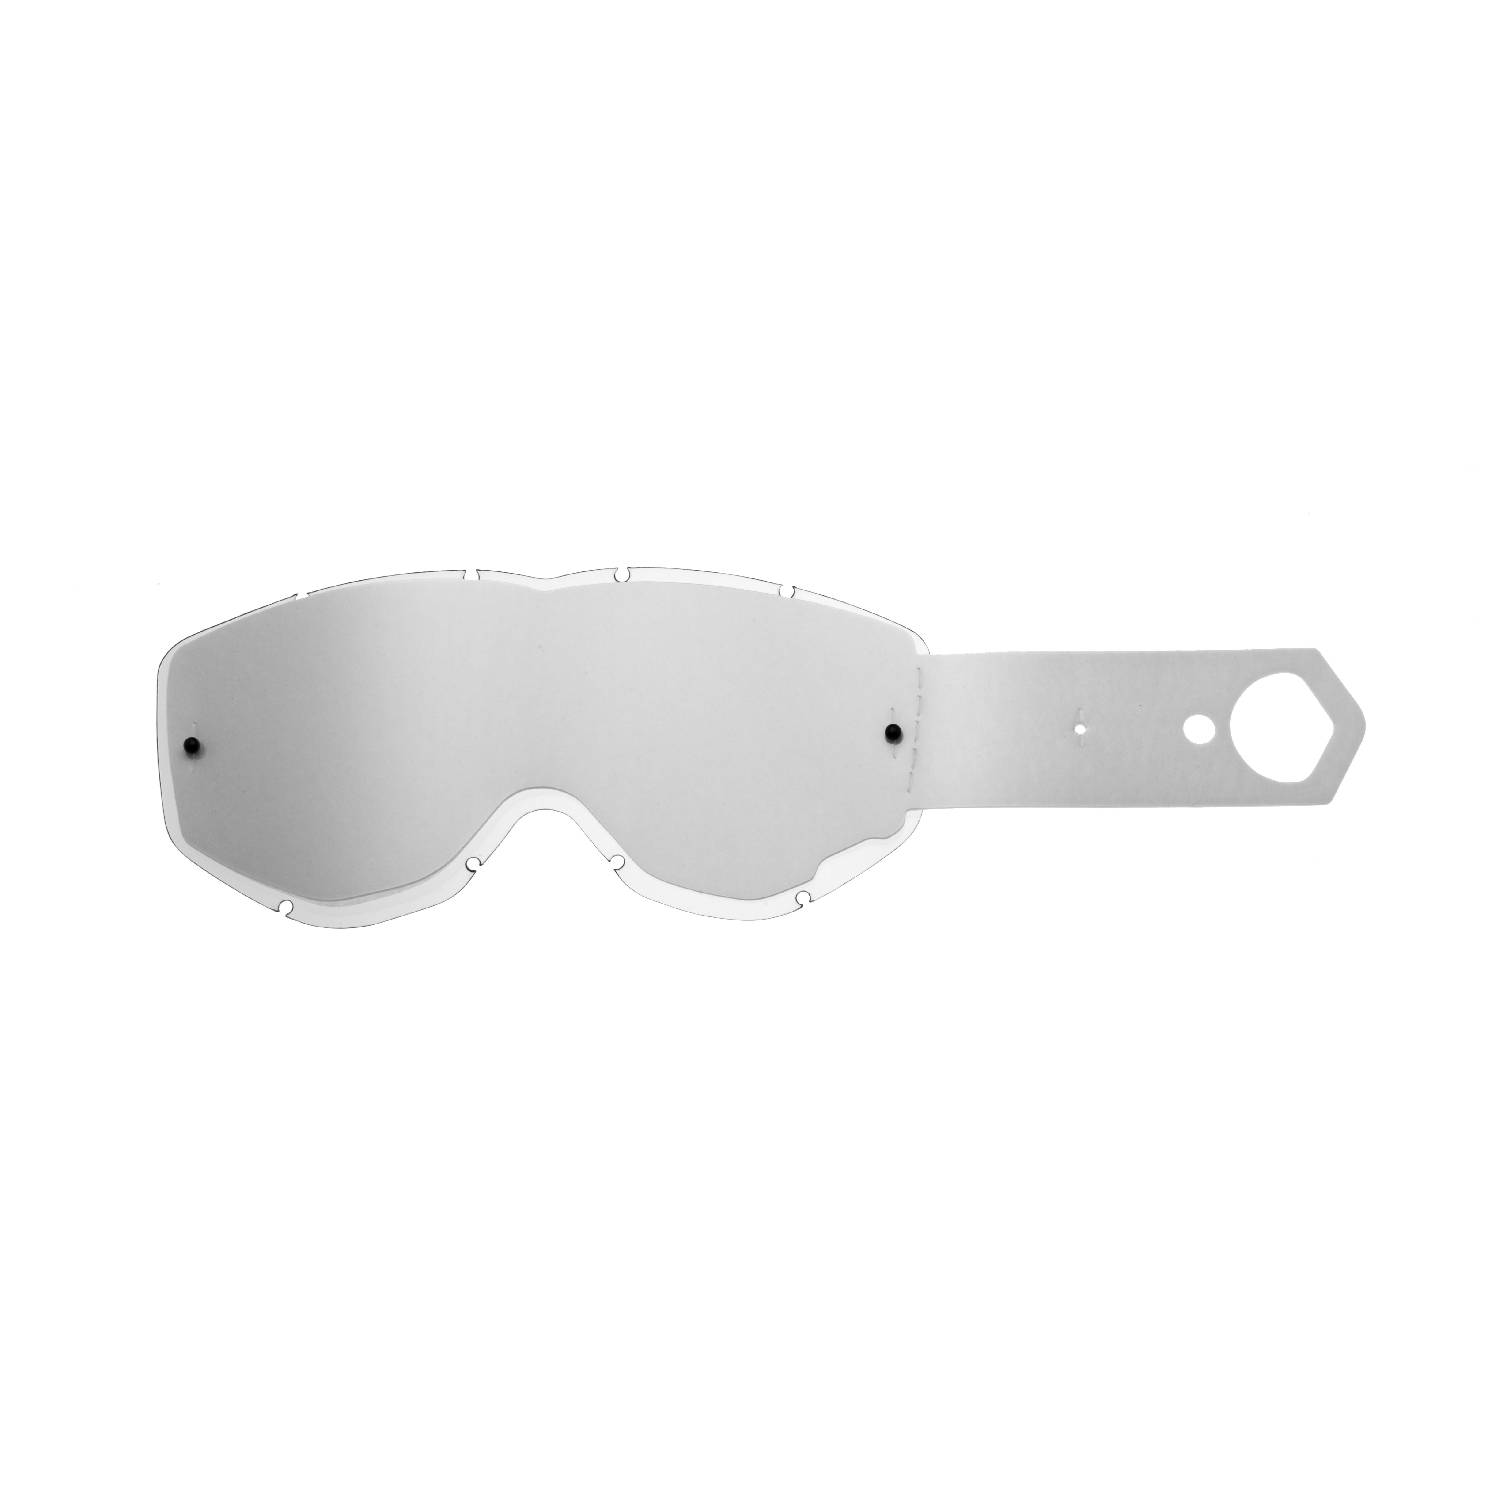 combo lenses with clear lenses with 10 tear off compatible for Spy Magneto goggle